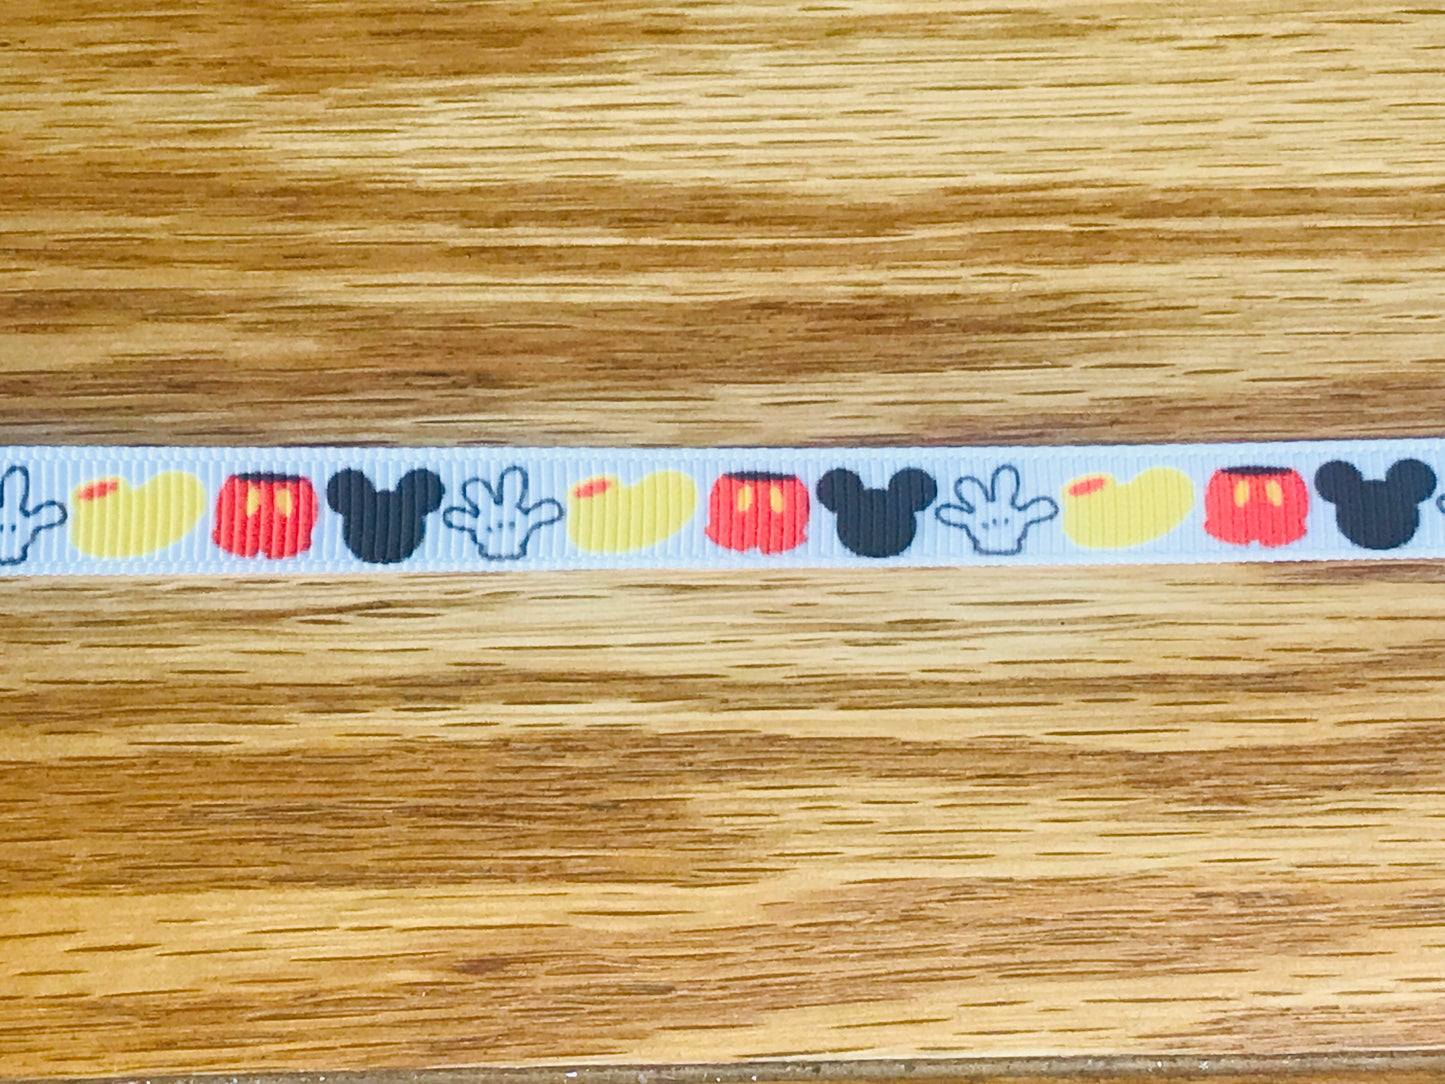 3/8" Mickey Mouse Body Parts Mickey Mouse Ears Hat Glove Shoe Body Grosgrain Ribbon